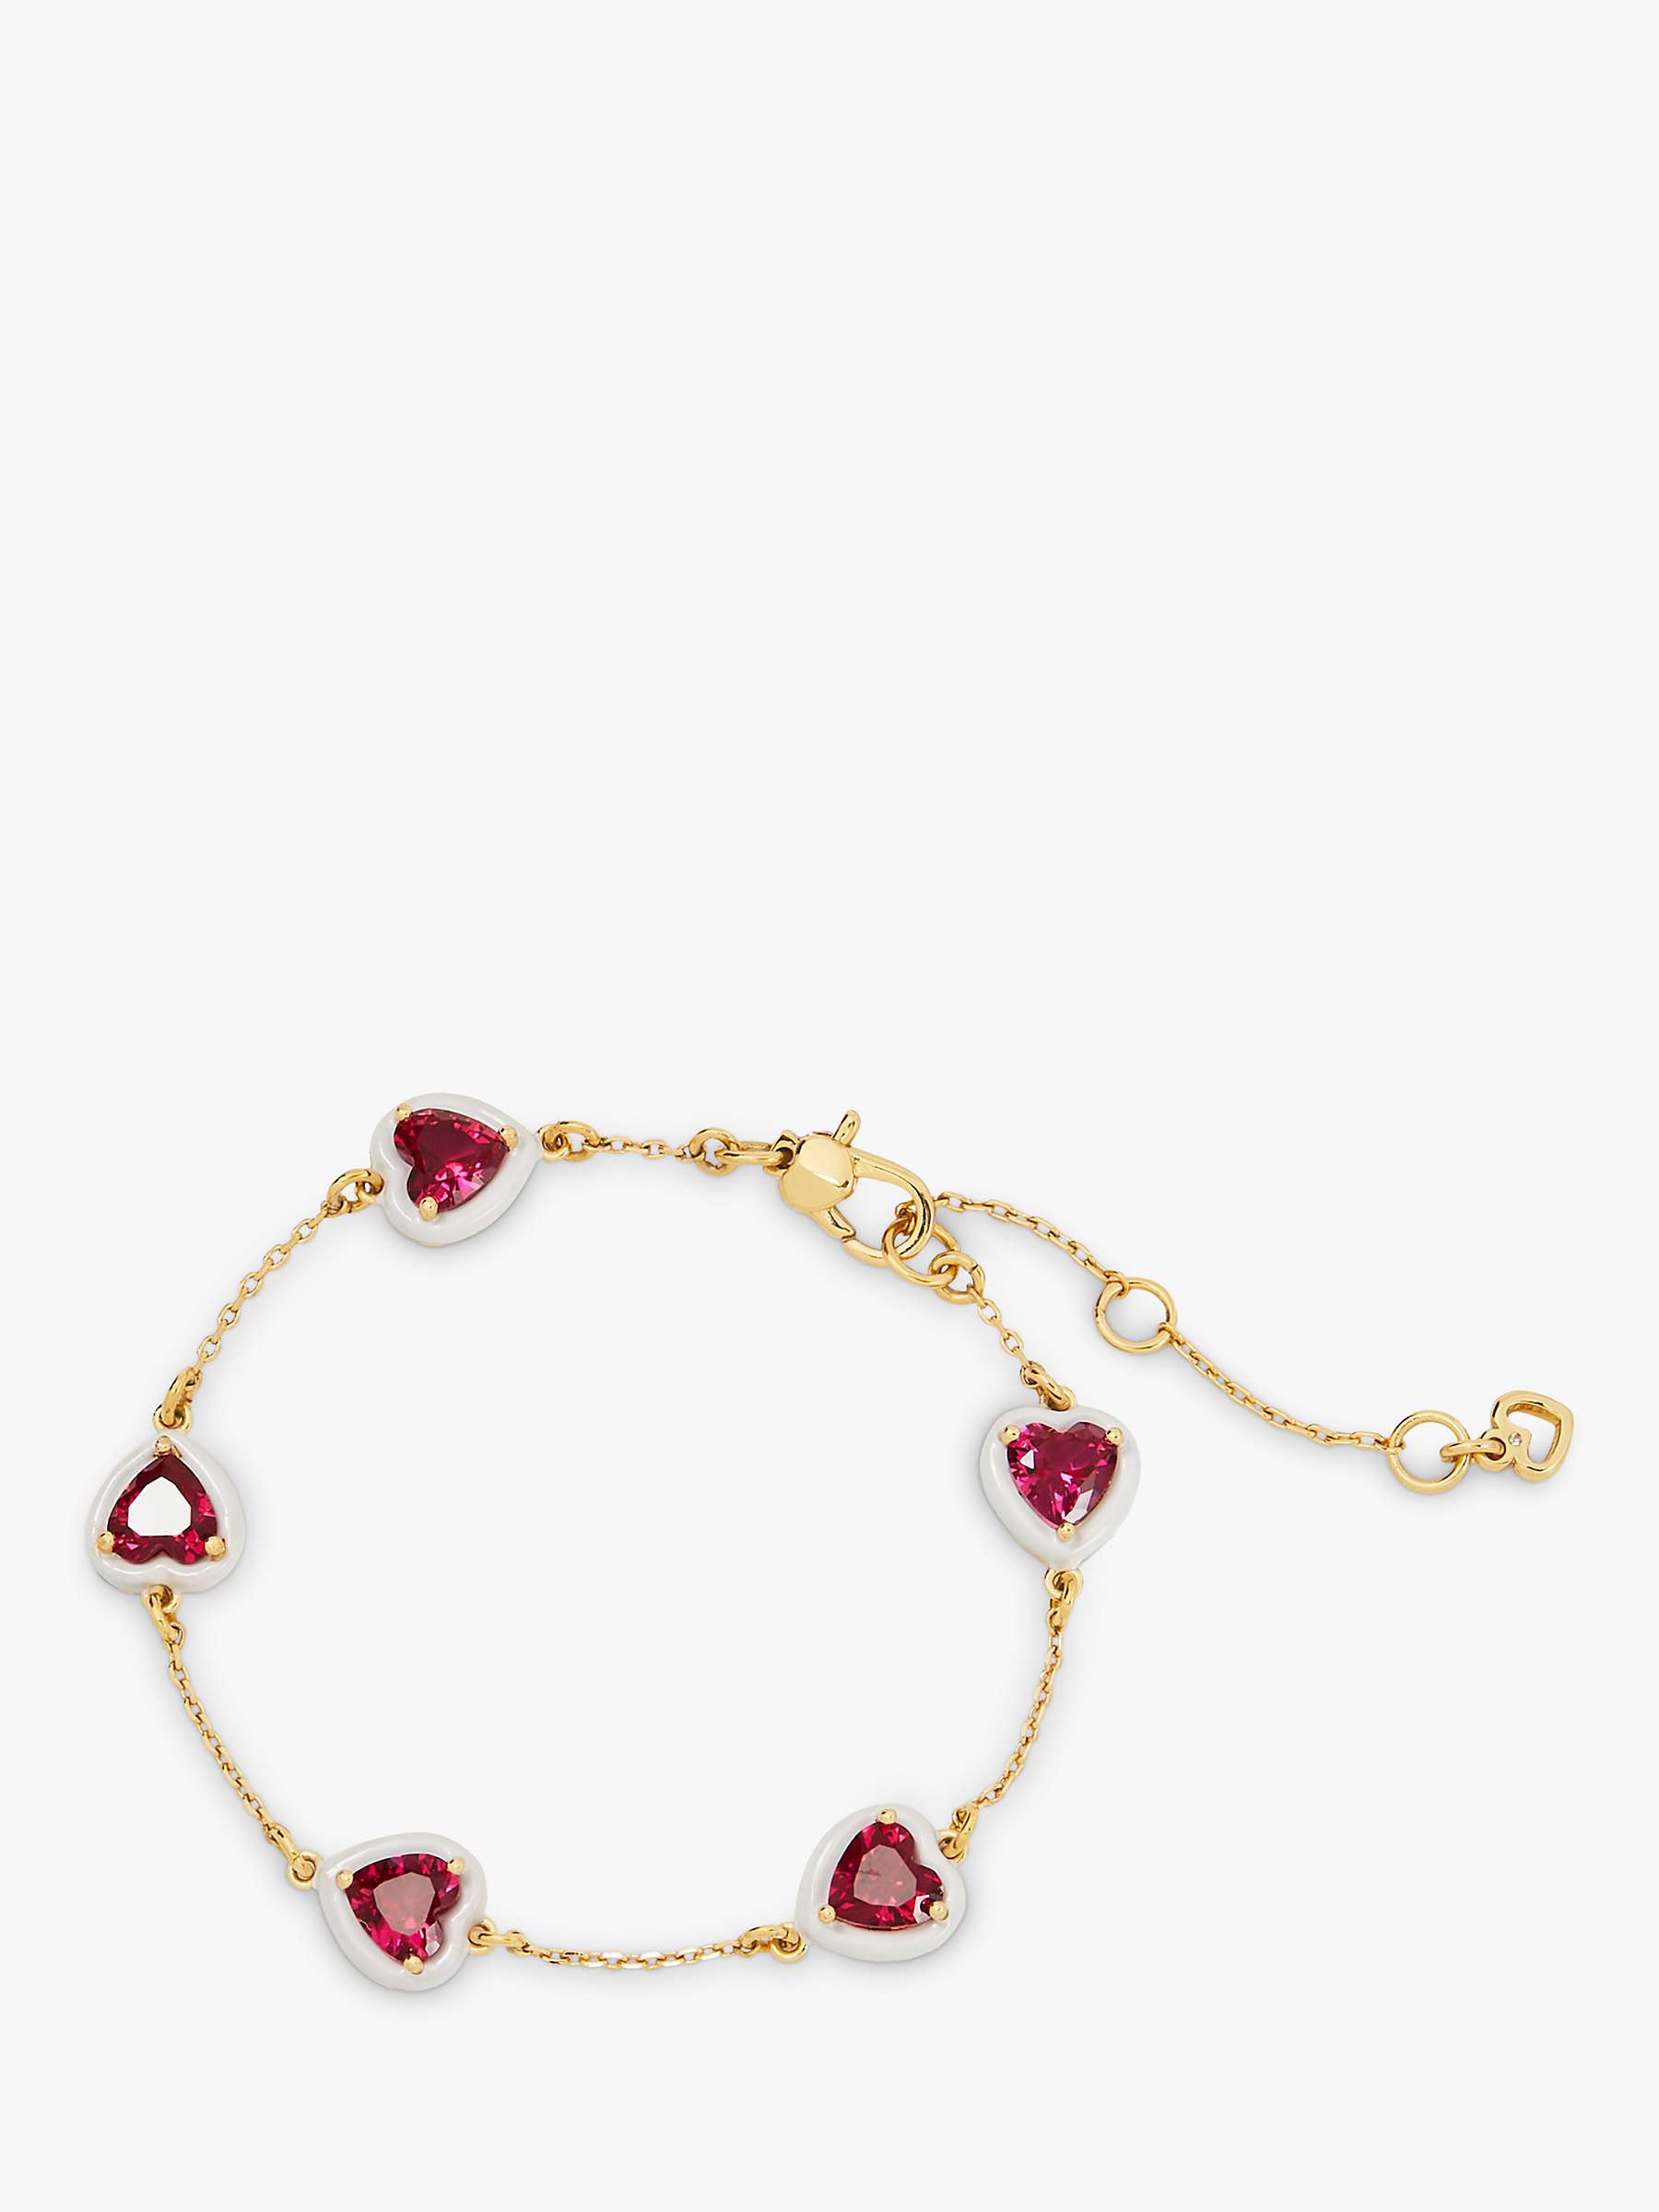 Buy kate spade new york Red Cubic Zirconia and Resin Heart Bracelet, Gold Online at johnlewis.com